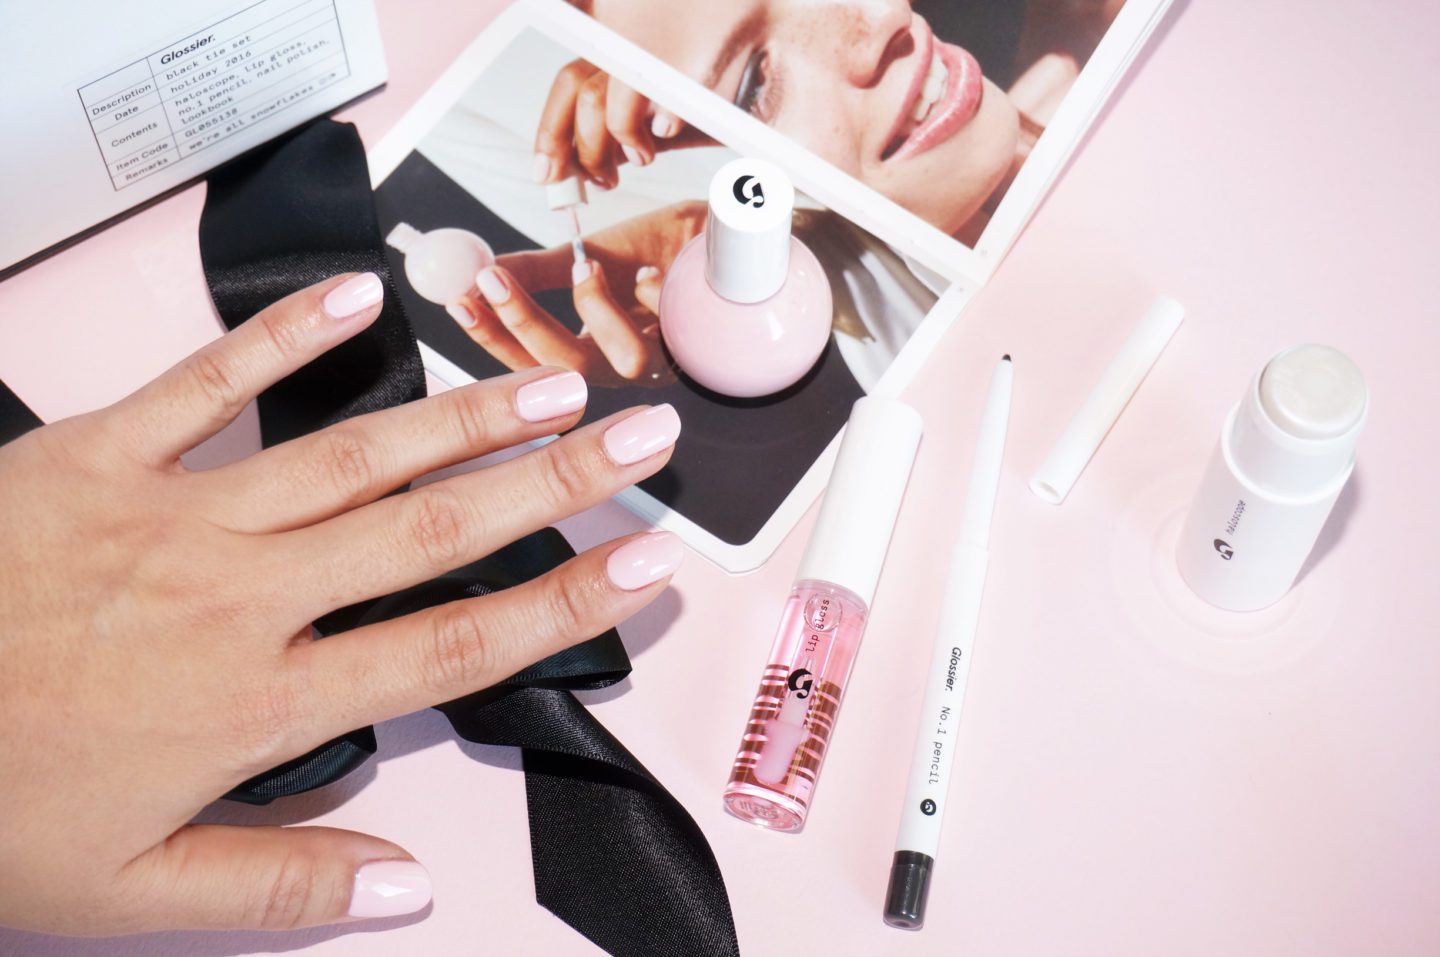 Glossier Black Tie Set for Holiday 2016